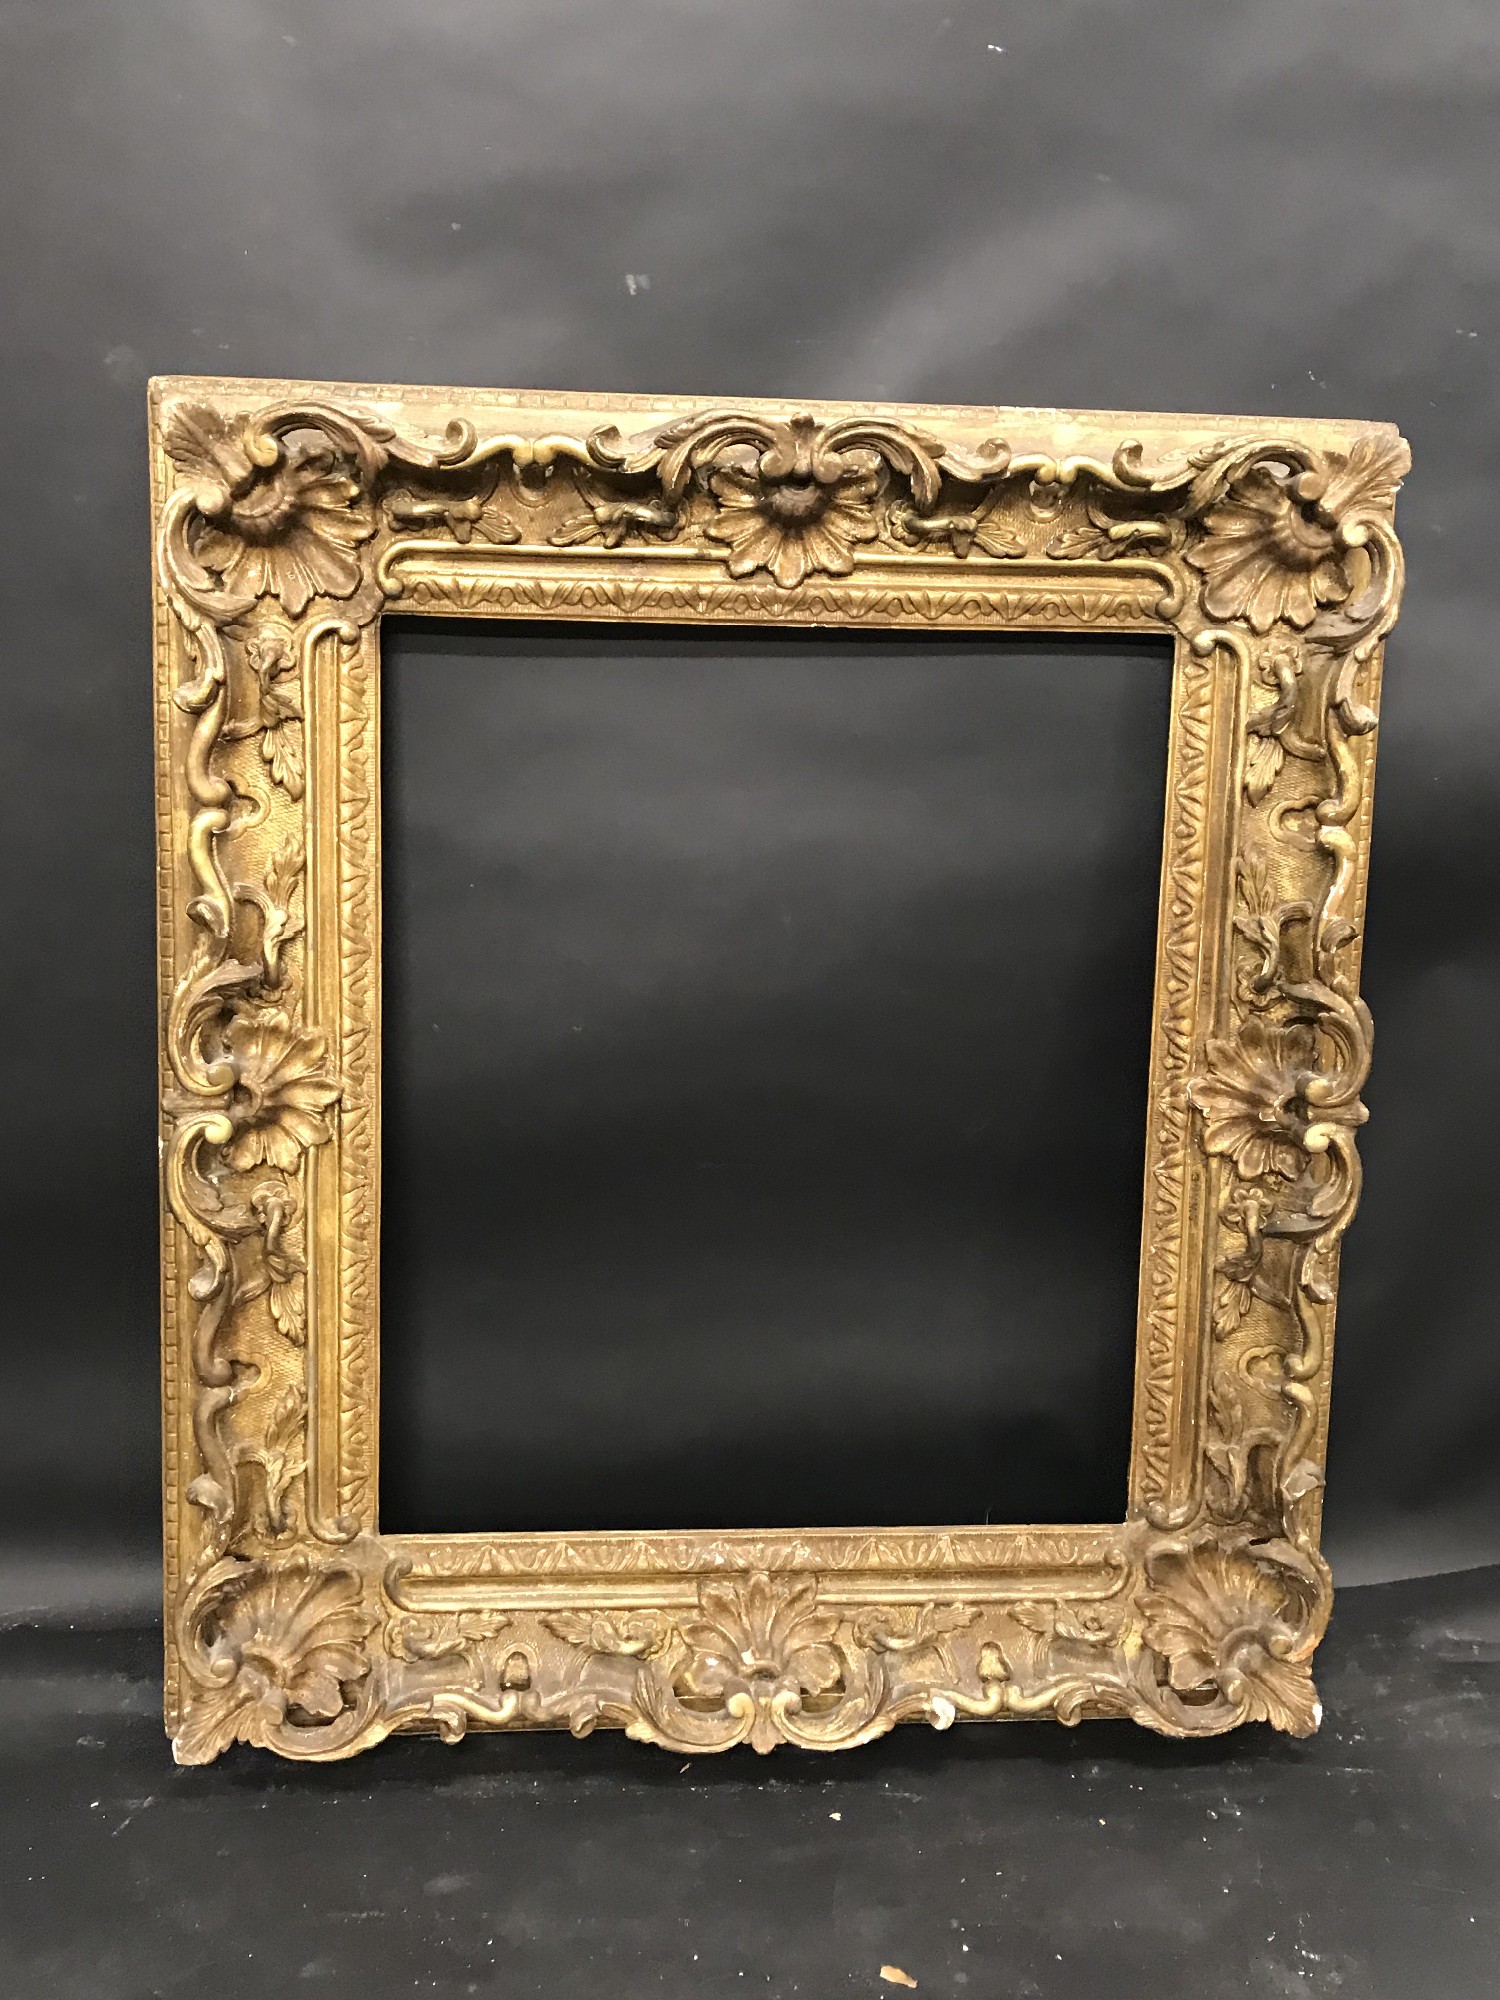 18th Century French School. A Louis XV style Carved Giltwood Frame, with Swept and Pierced Centres - Image 2 of 3